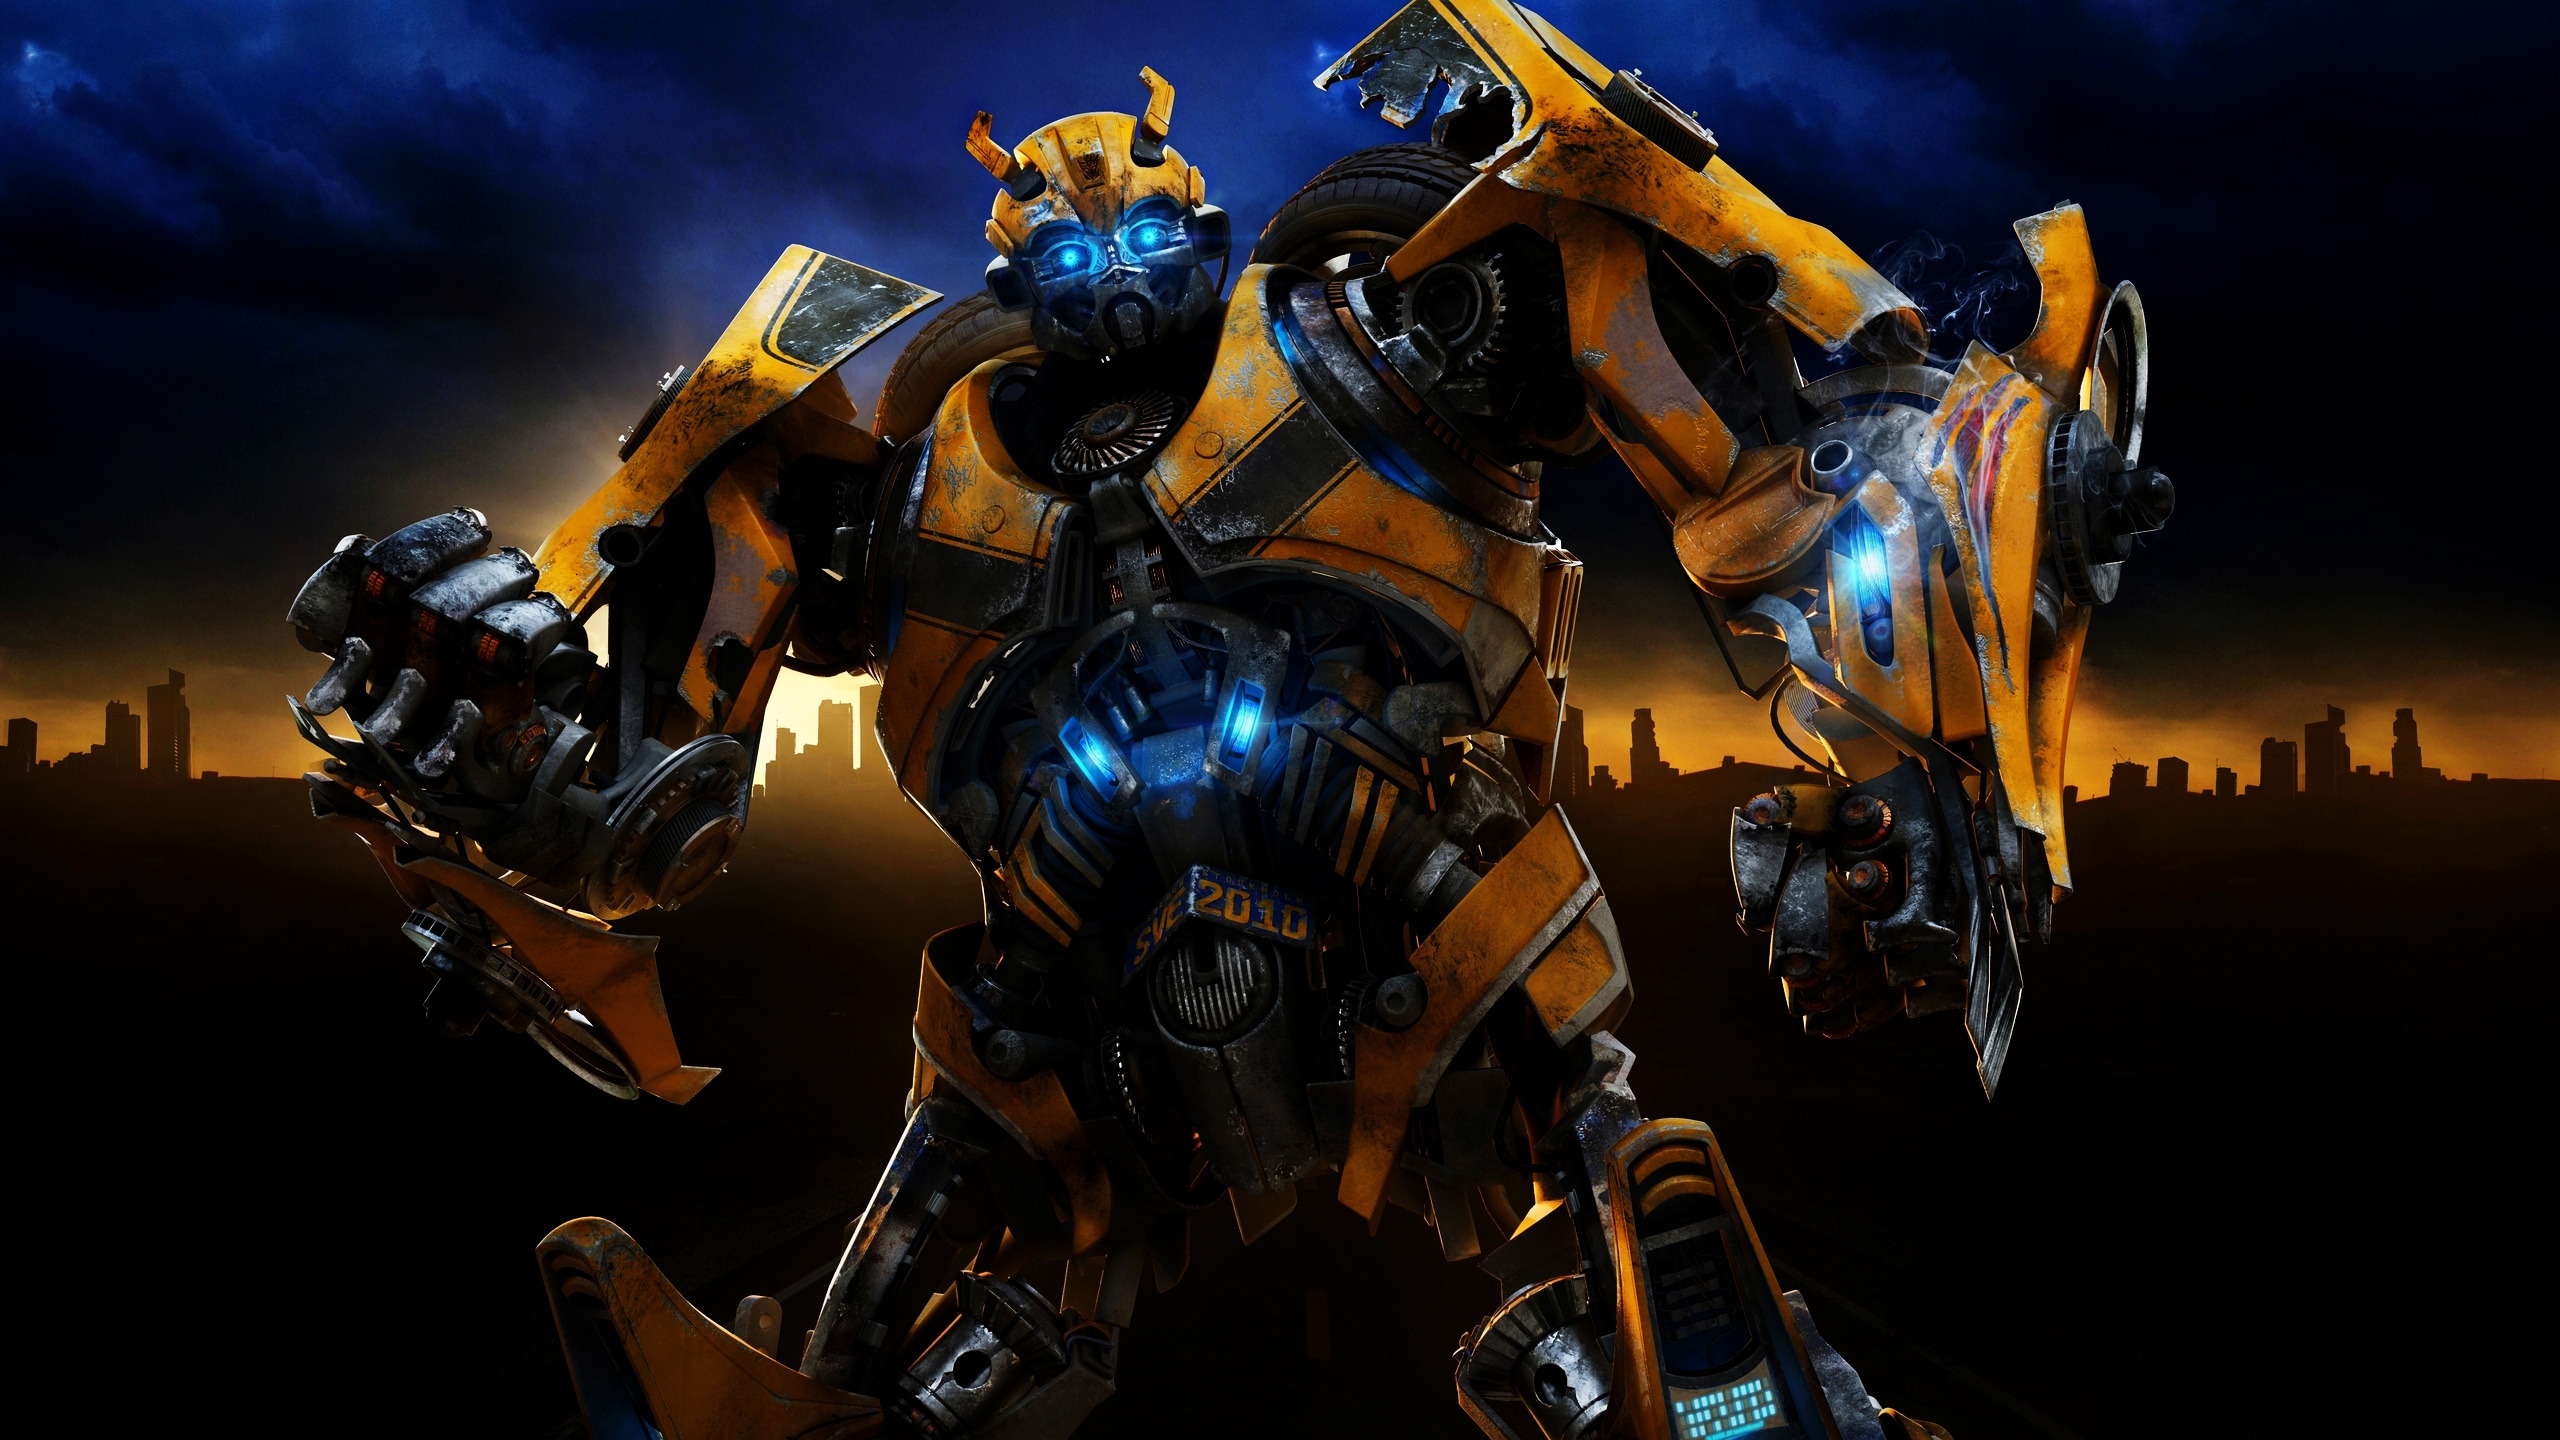 Transformers 2 for 2560x1440 HDTV resolution